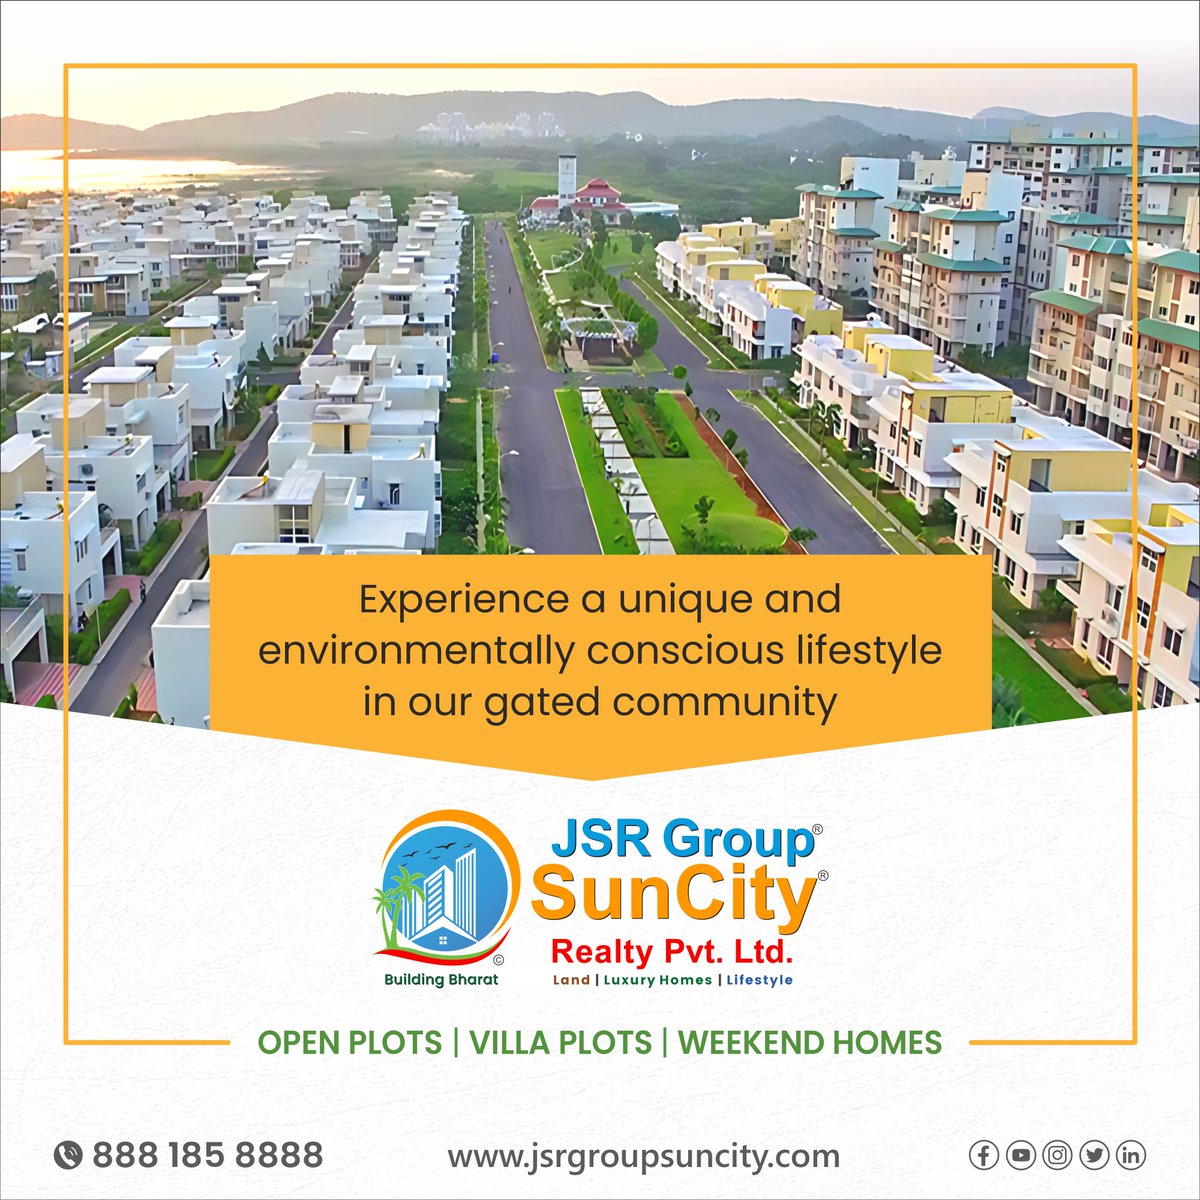 Experience a unique and environmentally conscious lifestyle in JSR Group SunCity's gated community. for more details visit jsrgroupsuncity.com or contact at 8881858888

#gatedcommunityplots #openplots #jsrgroupsuncity #weekendhome